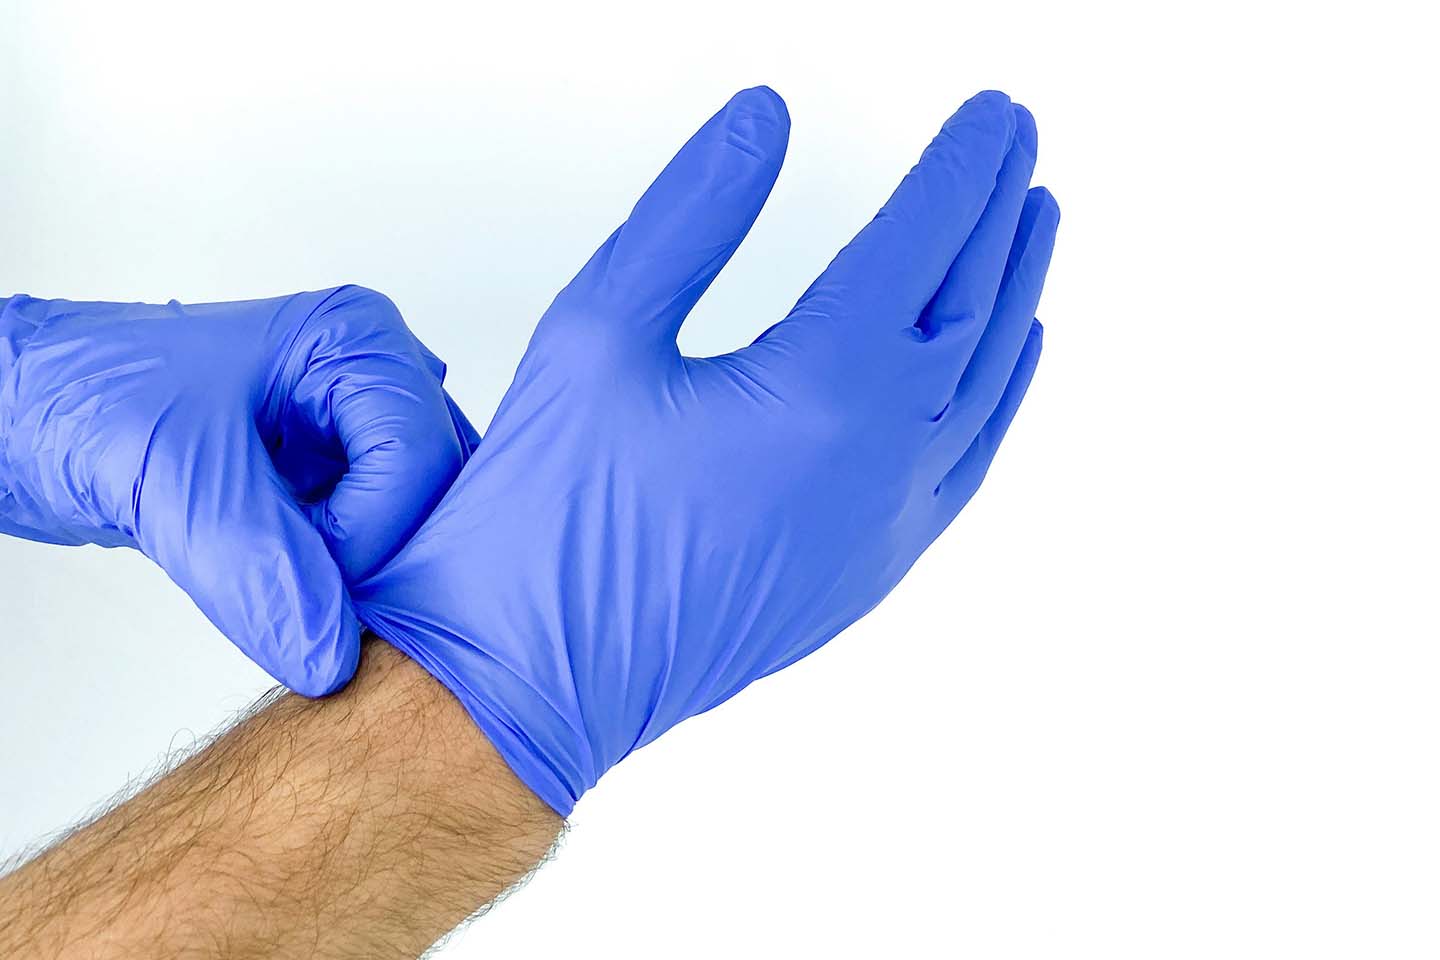 Hands putting on disposable gloves